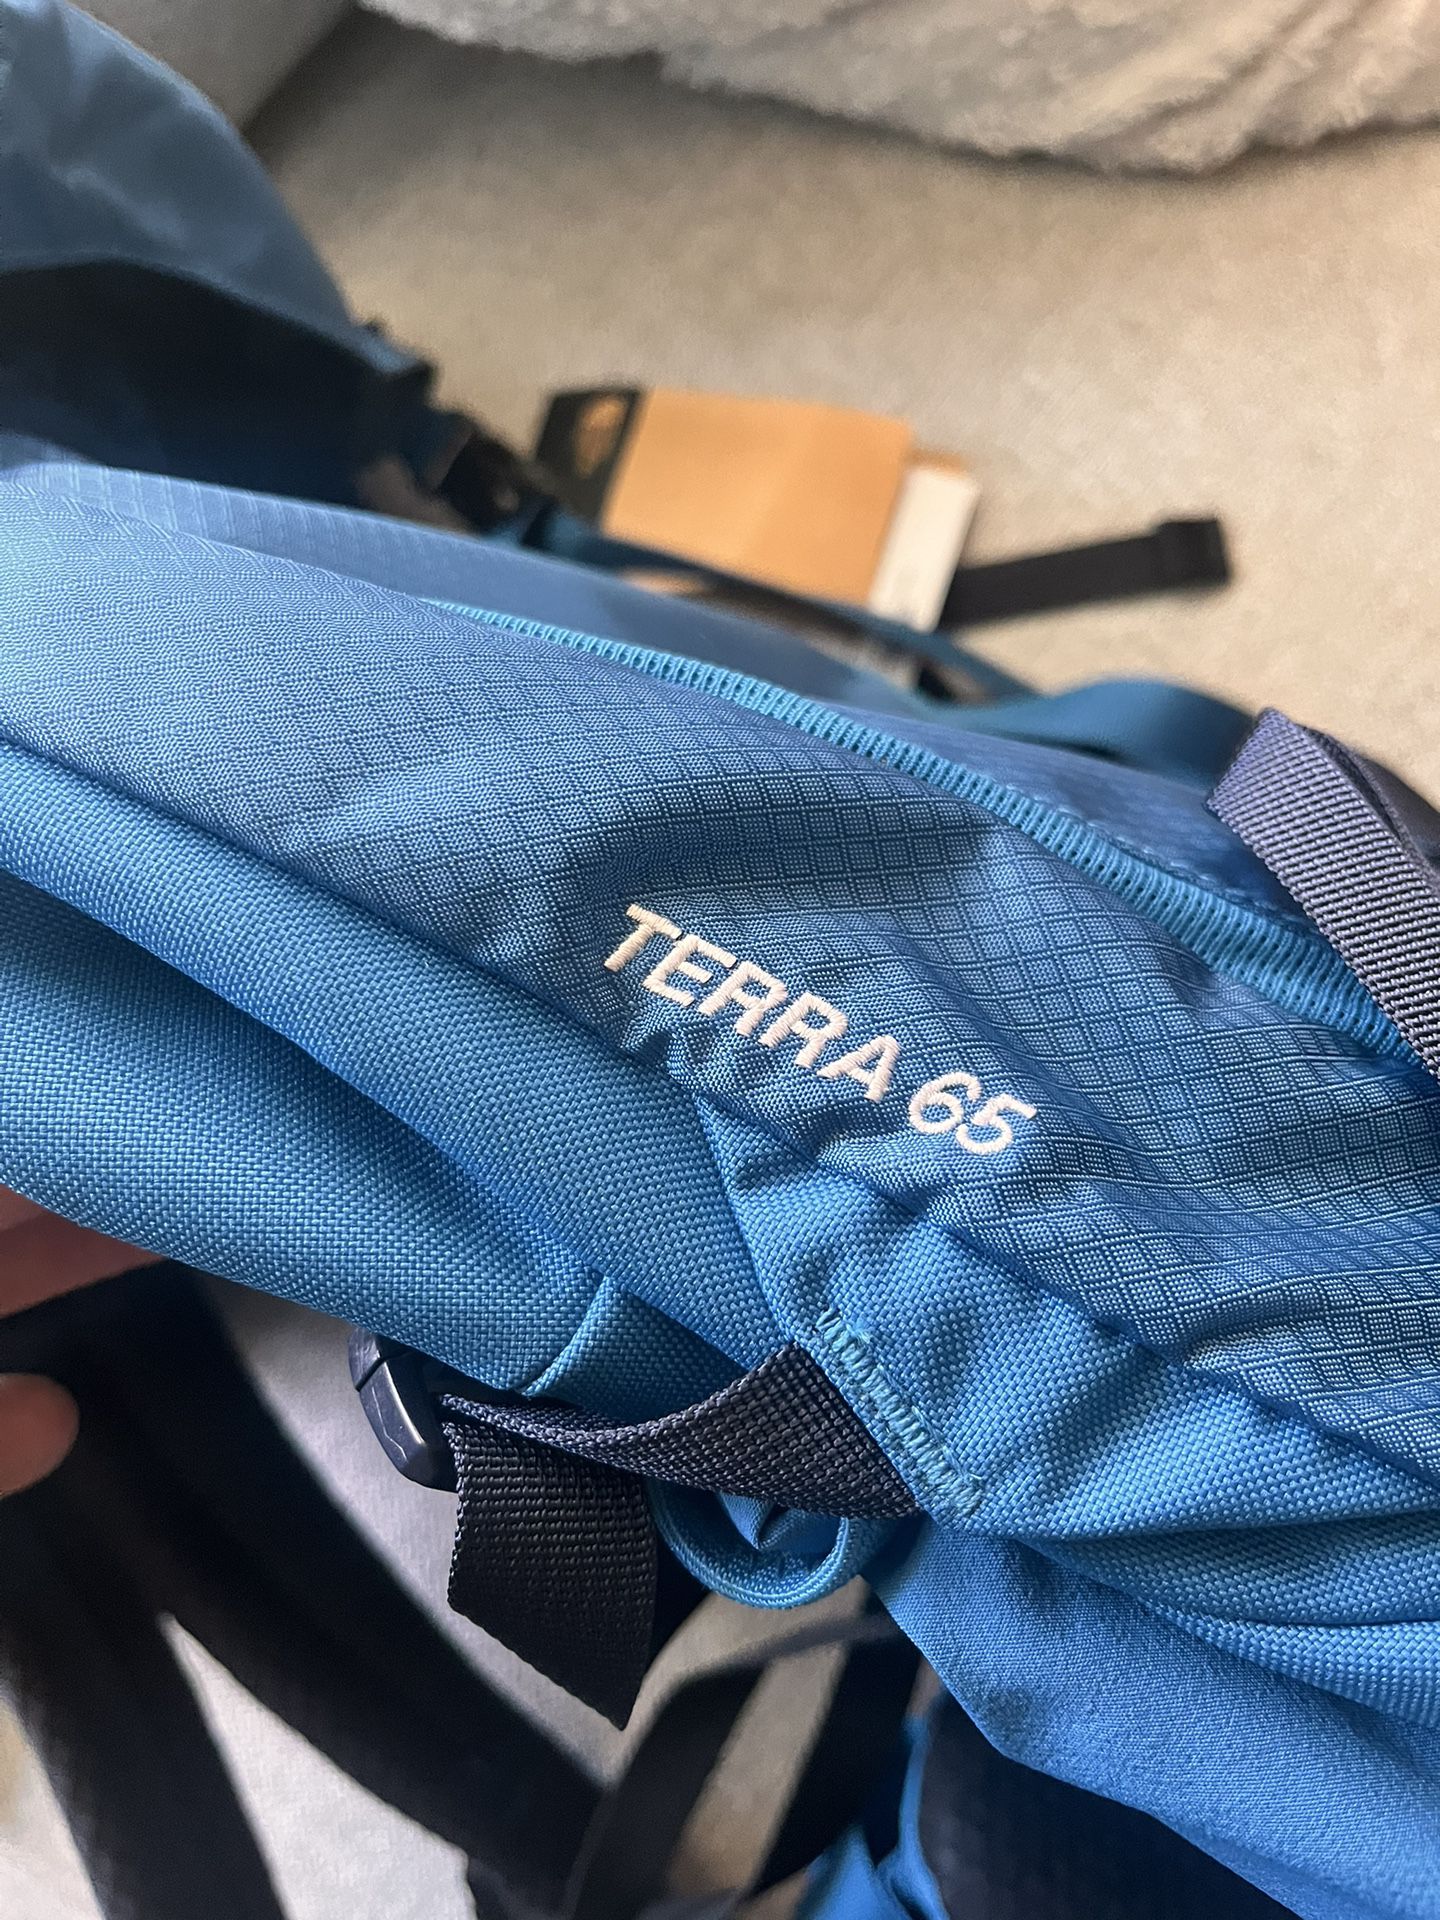 The North Face Terra 65 backpack NWT